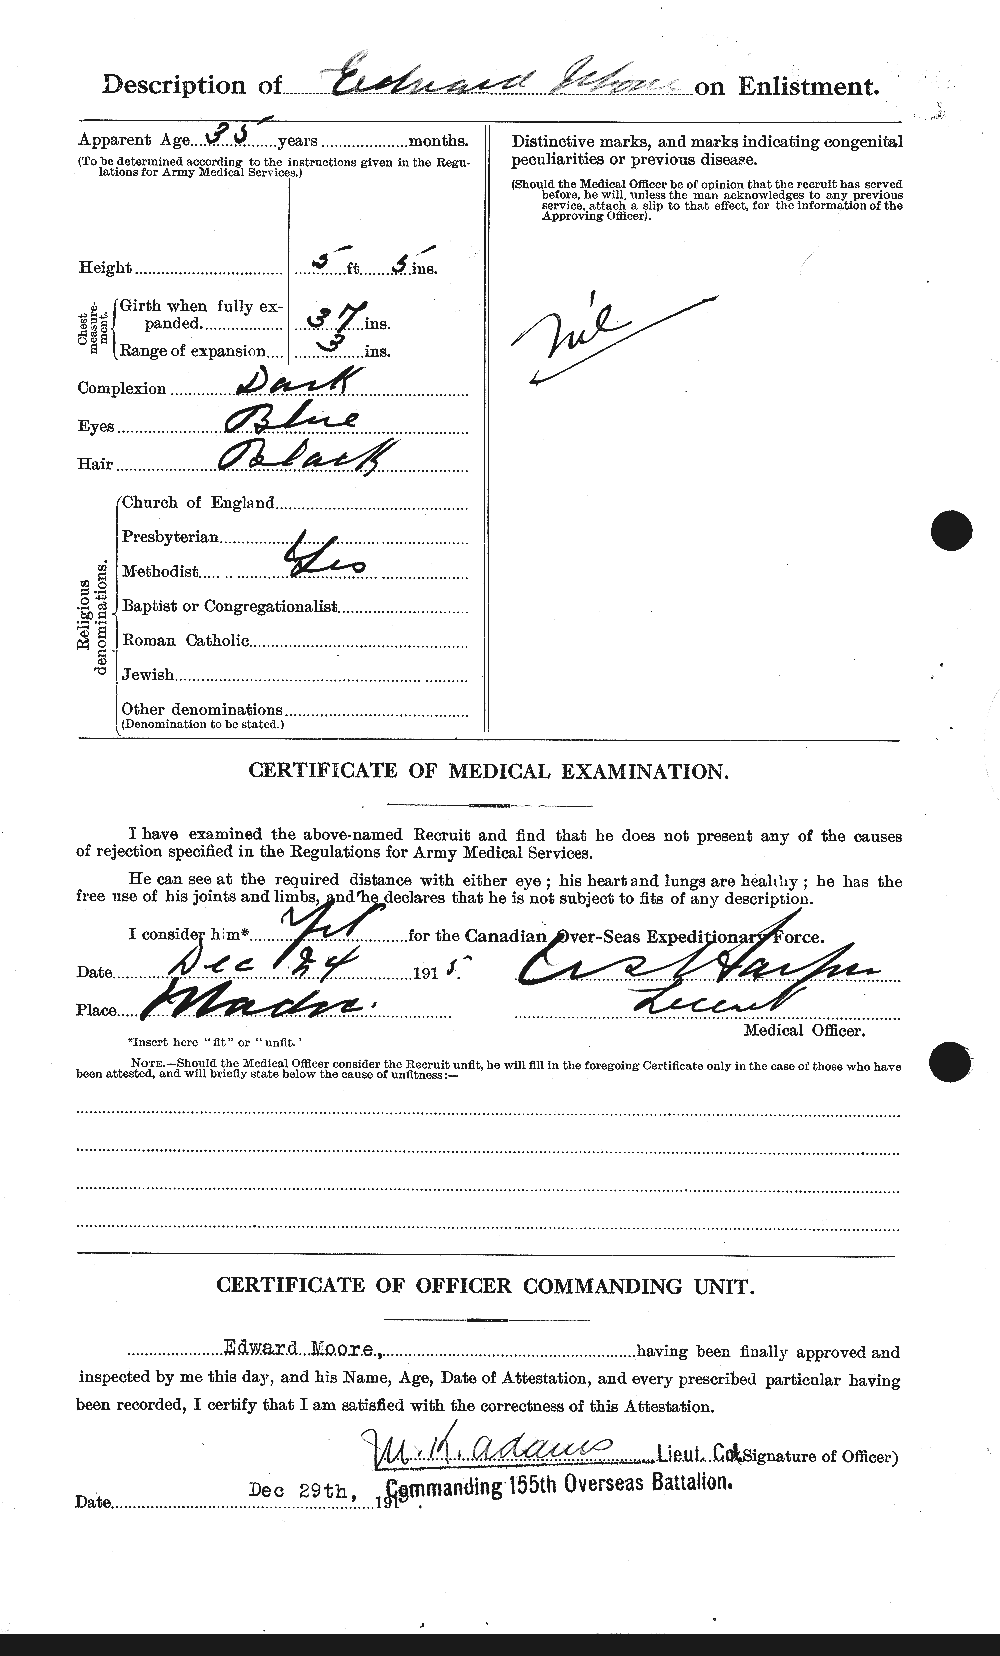 Personnel Records of the First World War - CEF 506613b